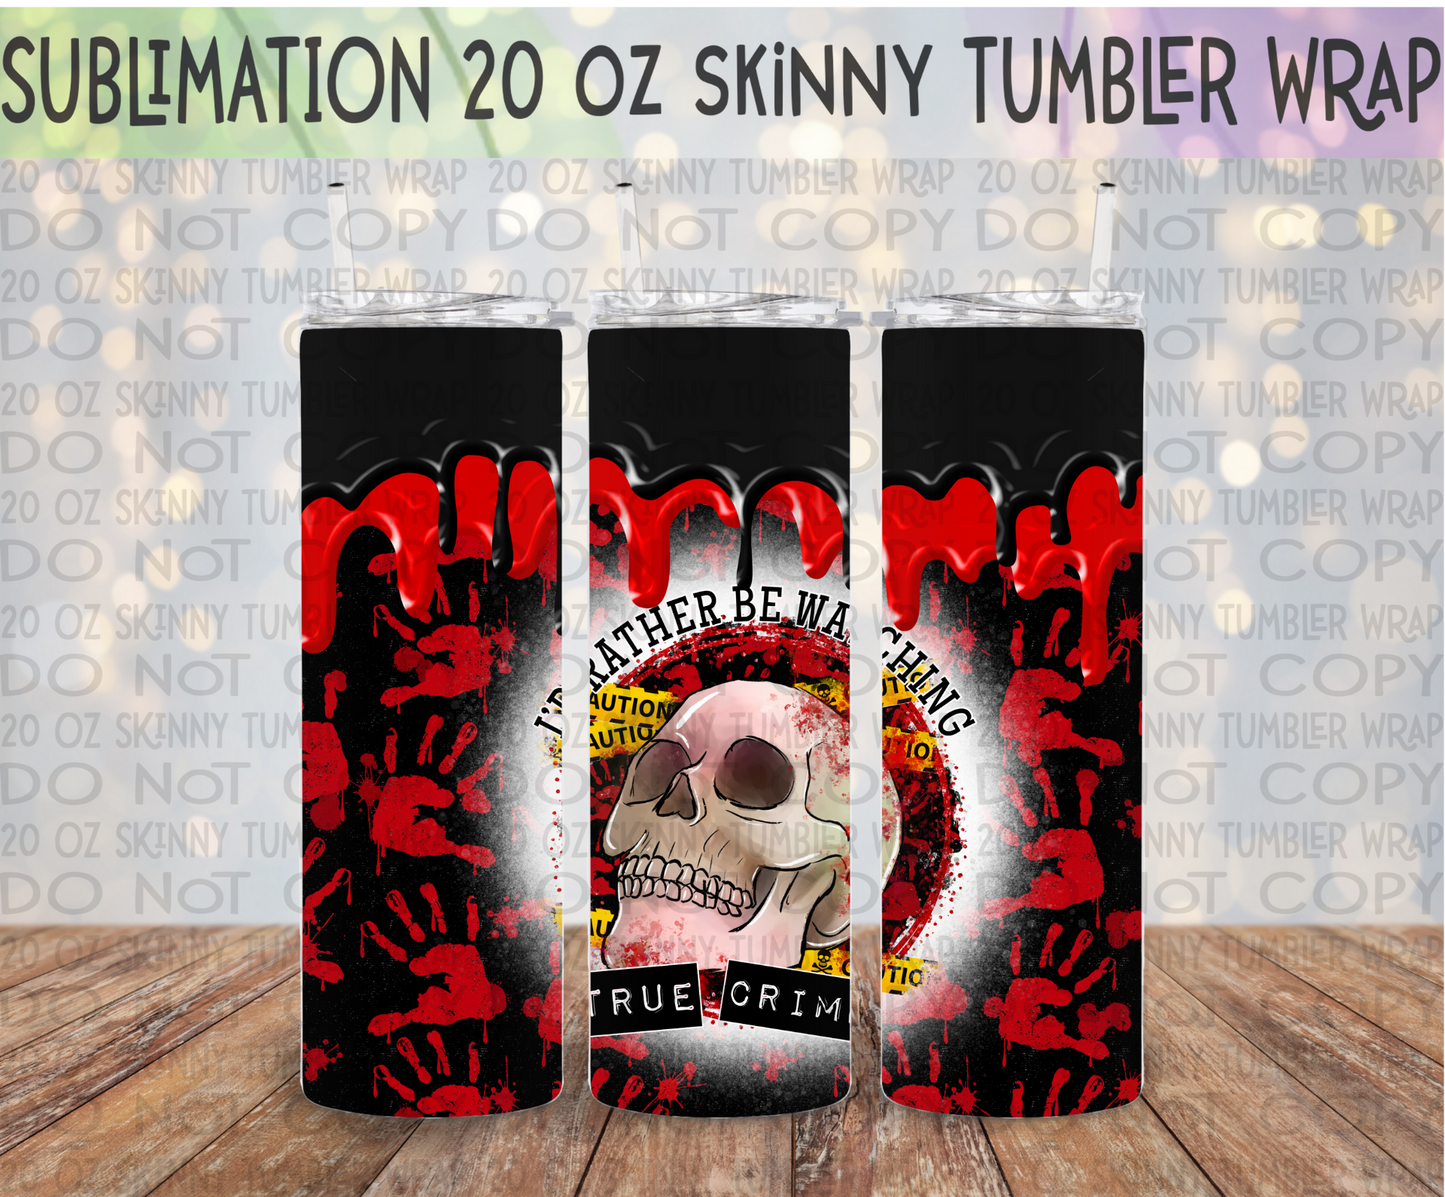 I'd Rather be Watching True Crime 20 Oz Skinny Tumbler Wrap - Sublimation Transfer - RTS